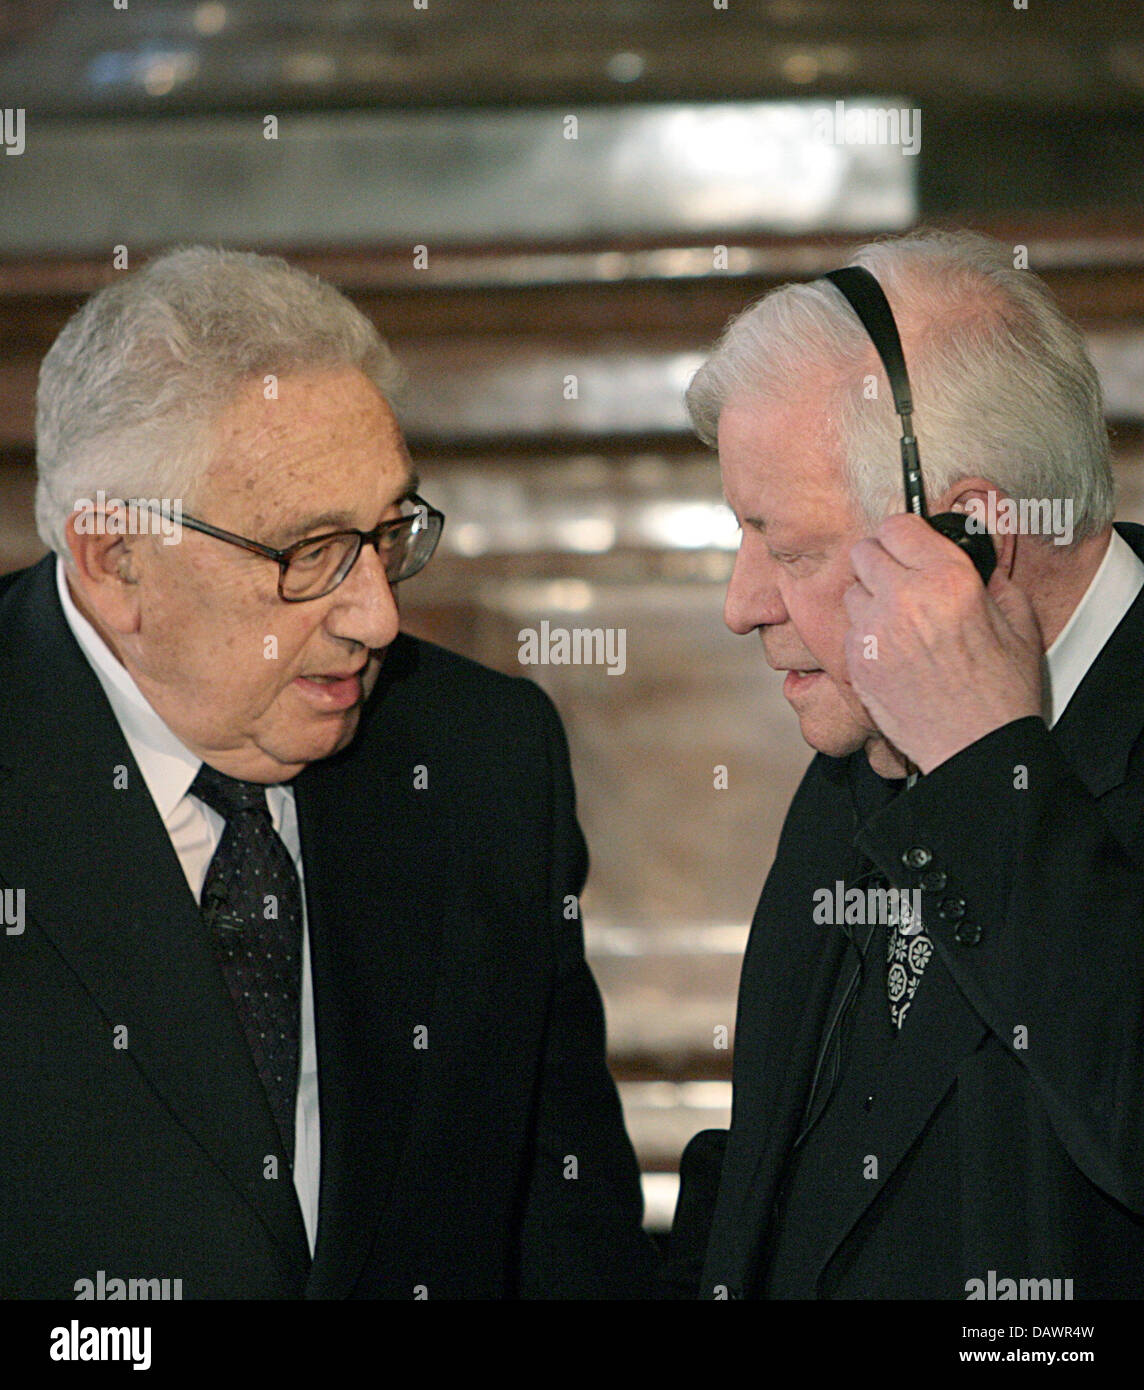 Former German chancellor Helmut Schmidt (R) talks with former US foreign minister Henry Kissinger (L) as he receives the new Henry A. Kissinger Prize from the American Academy and Kissinger in Munich, Germany, 07 June 2007. Schmidt was the first to receive the prize for his life-long efforts at promoting engaged transatlantic dialogue. Photo: Frank Leonhardt Stock Photo